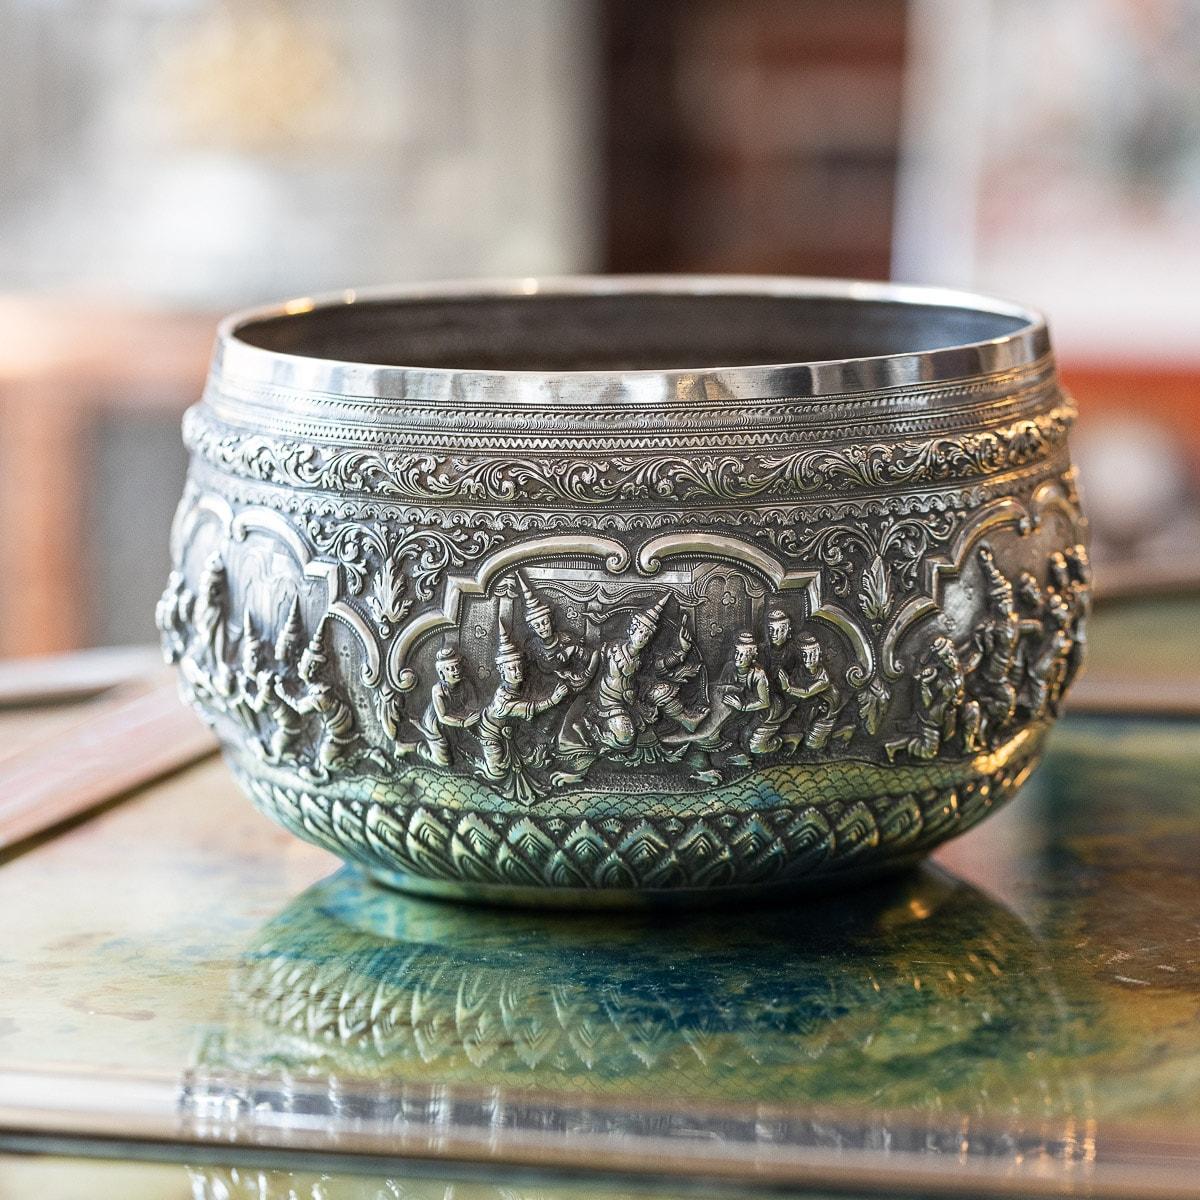 Antique 19th Century Exceptional Burmese, Myanmar solid silver thabeik bowl, repousse' decorated in high relief depicting different traditional scenes from the Burmese mythology, showing detailed figures set against a chiseled matted background in